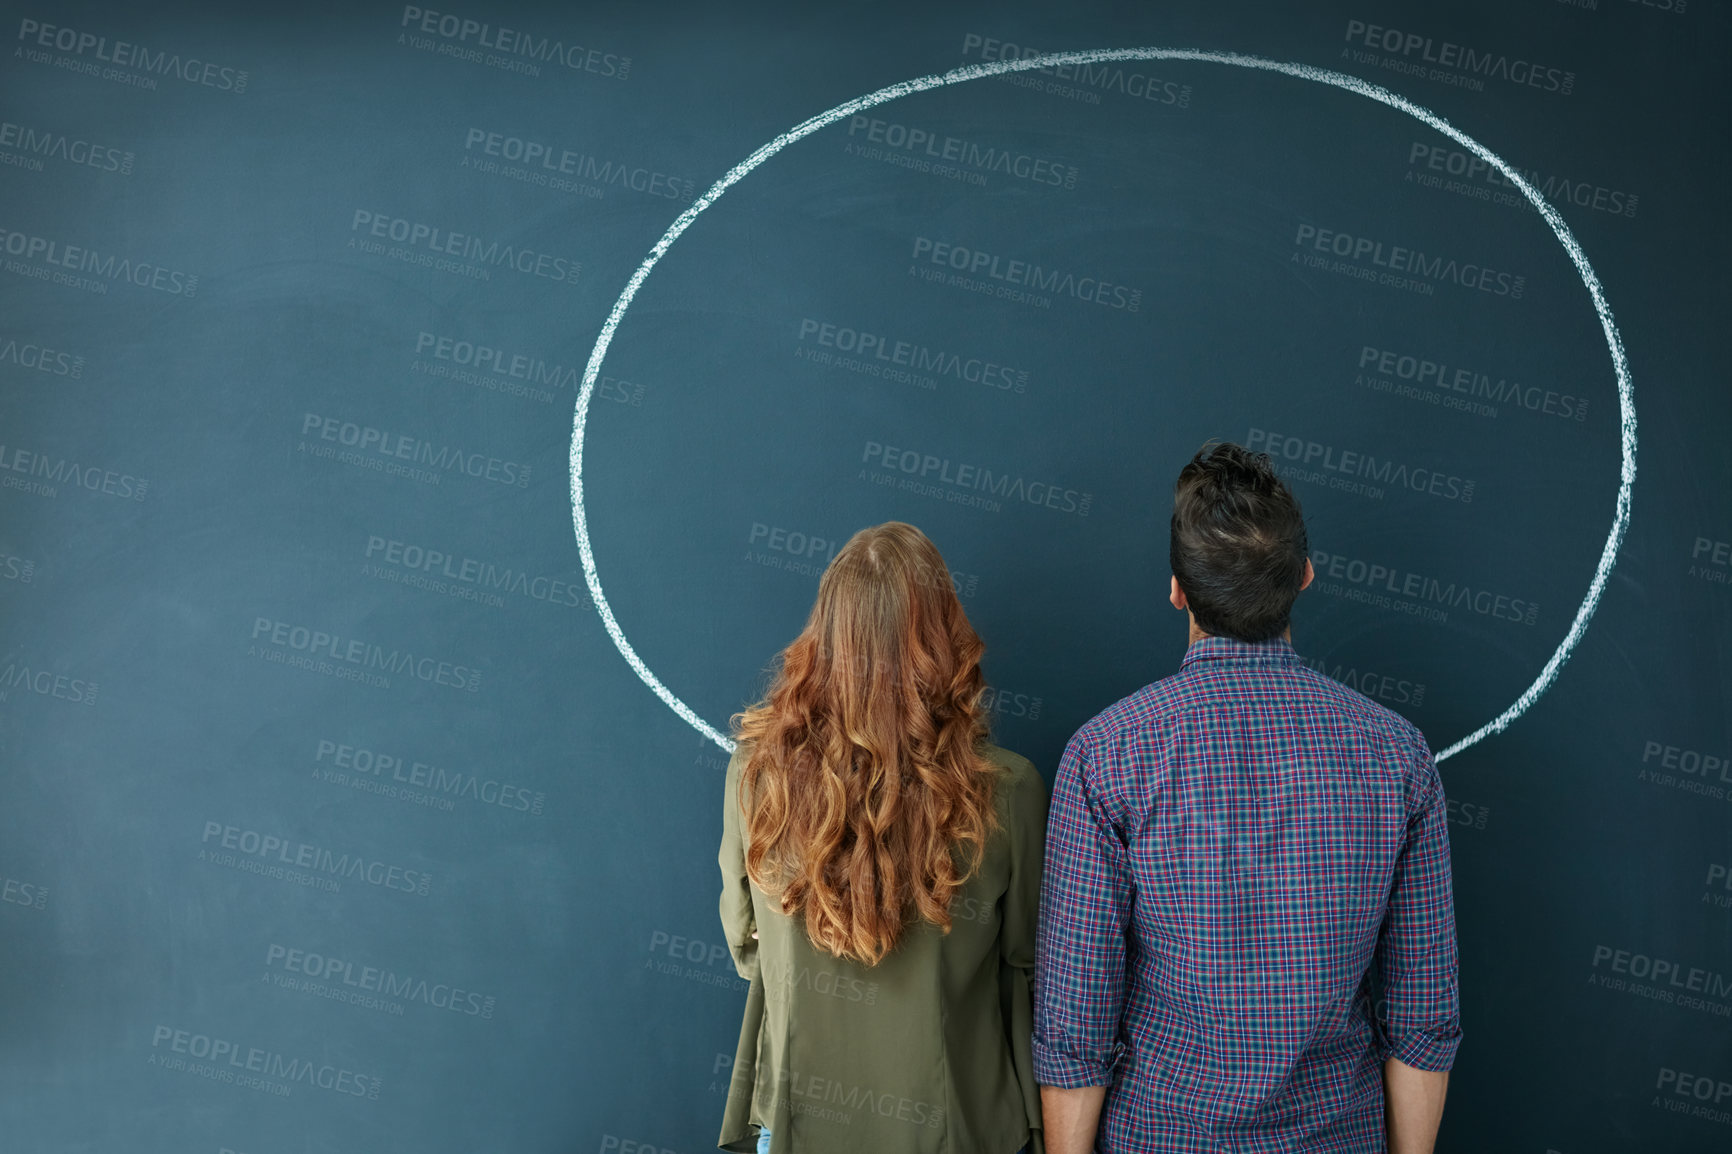 Buy stock photo Rearview shot of a young couple looking at an empty circle drawn on a blackboard